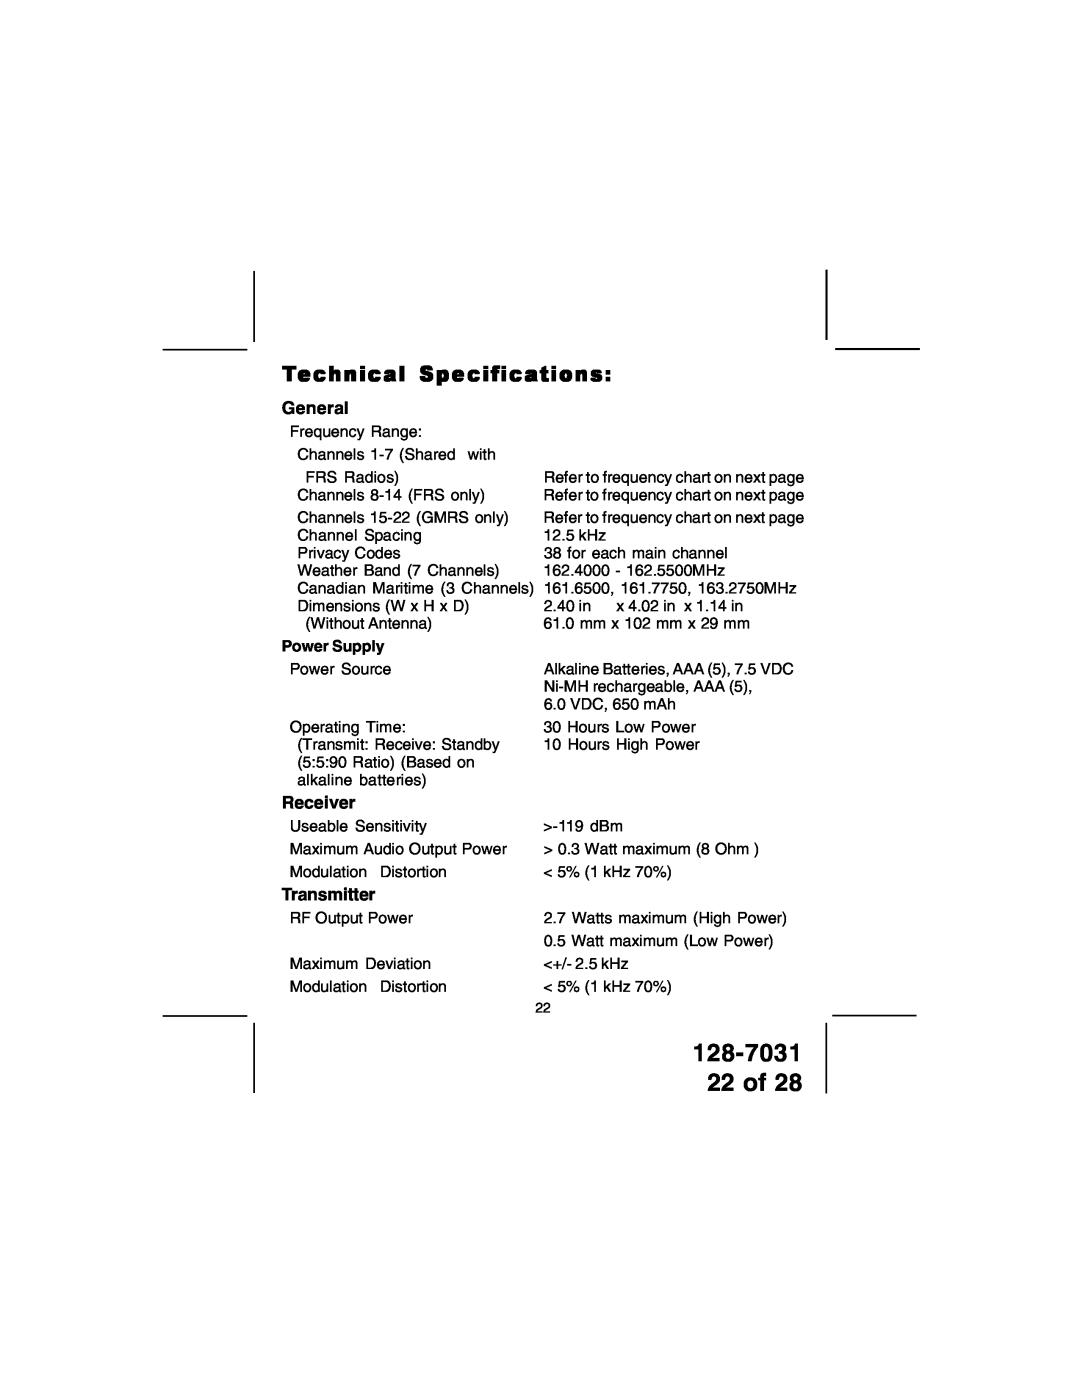 Audiovox 128-7031 owner manual 22 of, Technical Specifications, General, Receiver, Transmitter, Power Supply 